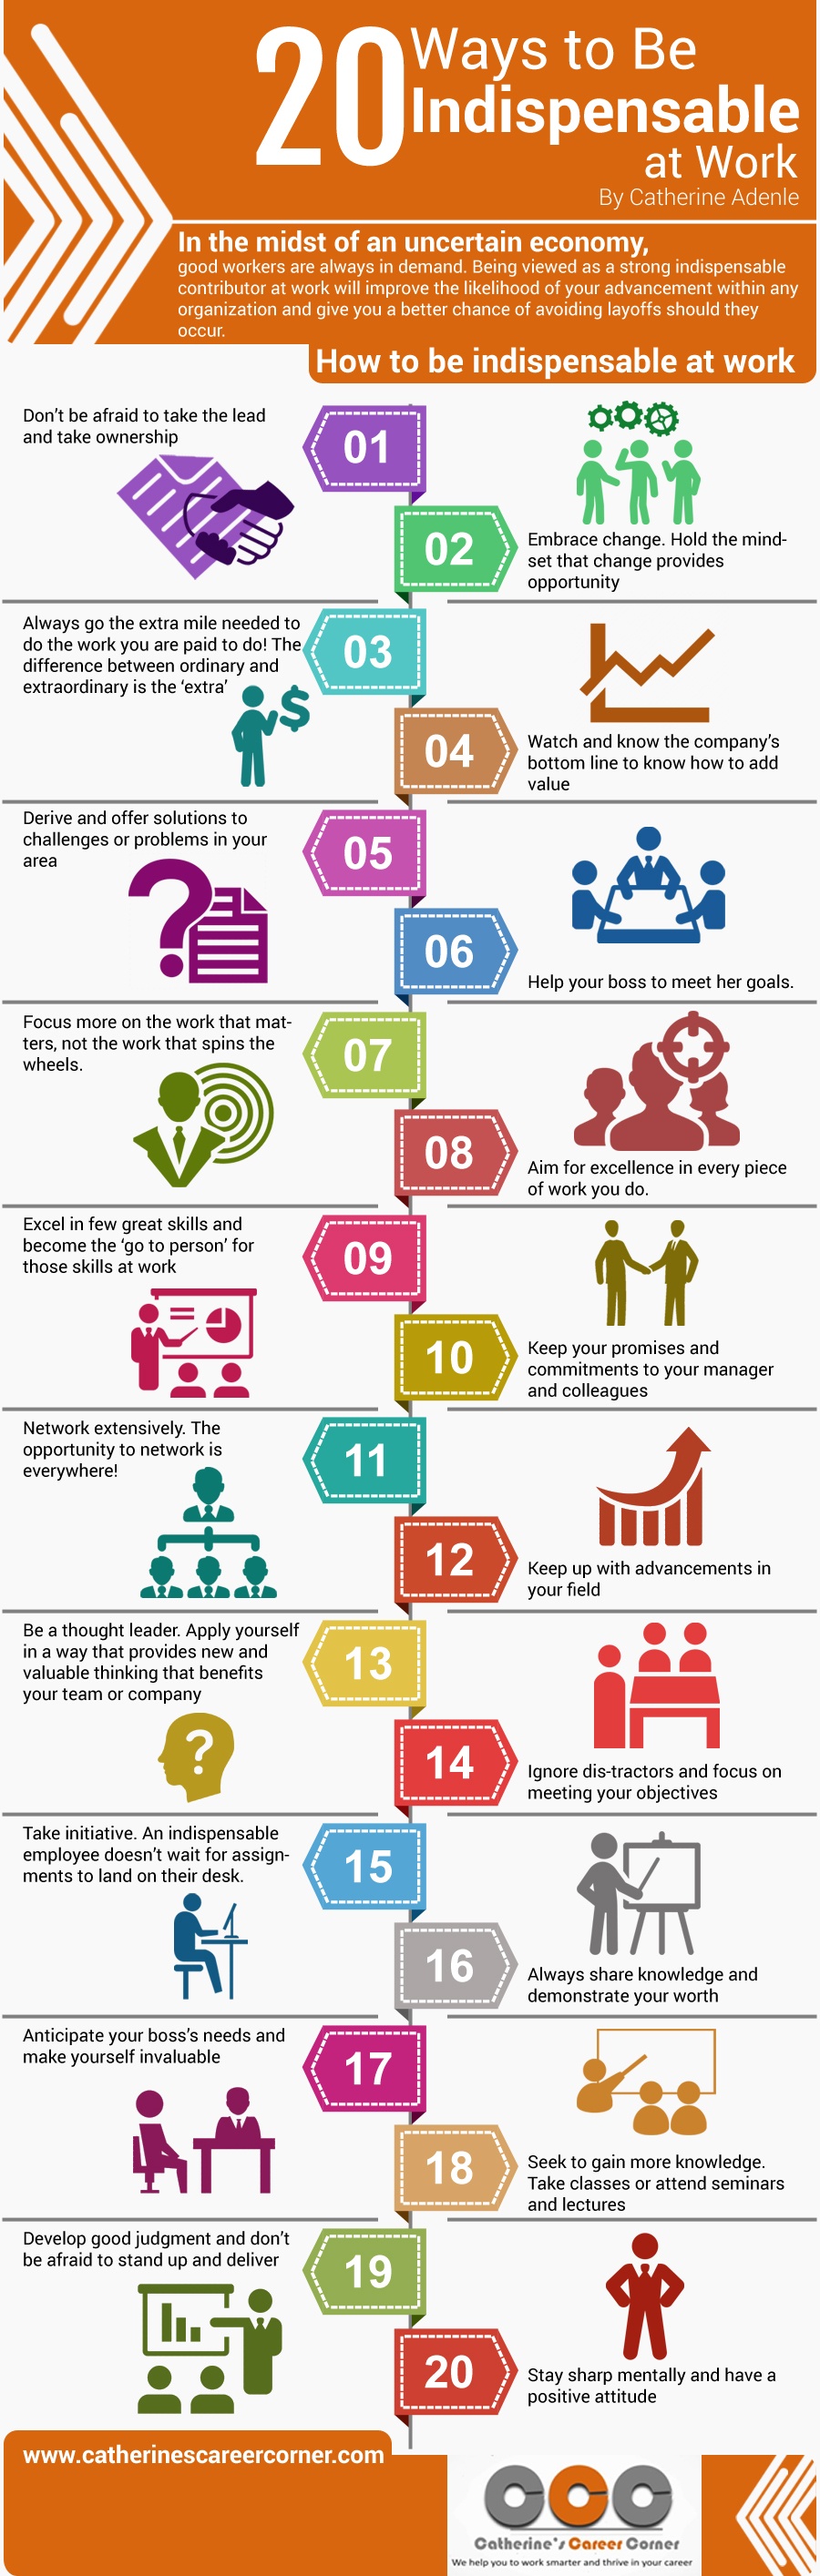 20 Ways to Be Indispensable at Work (Infographic)